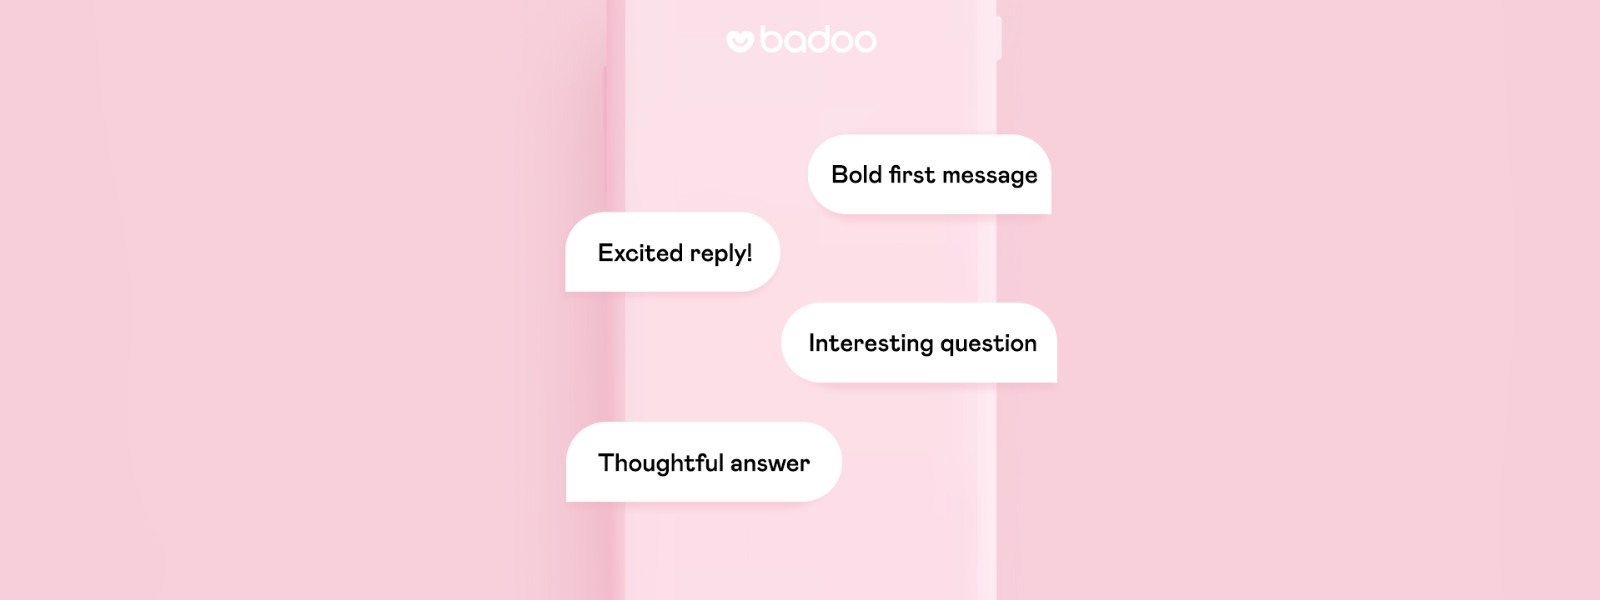 Badoo message delivered but not read